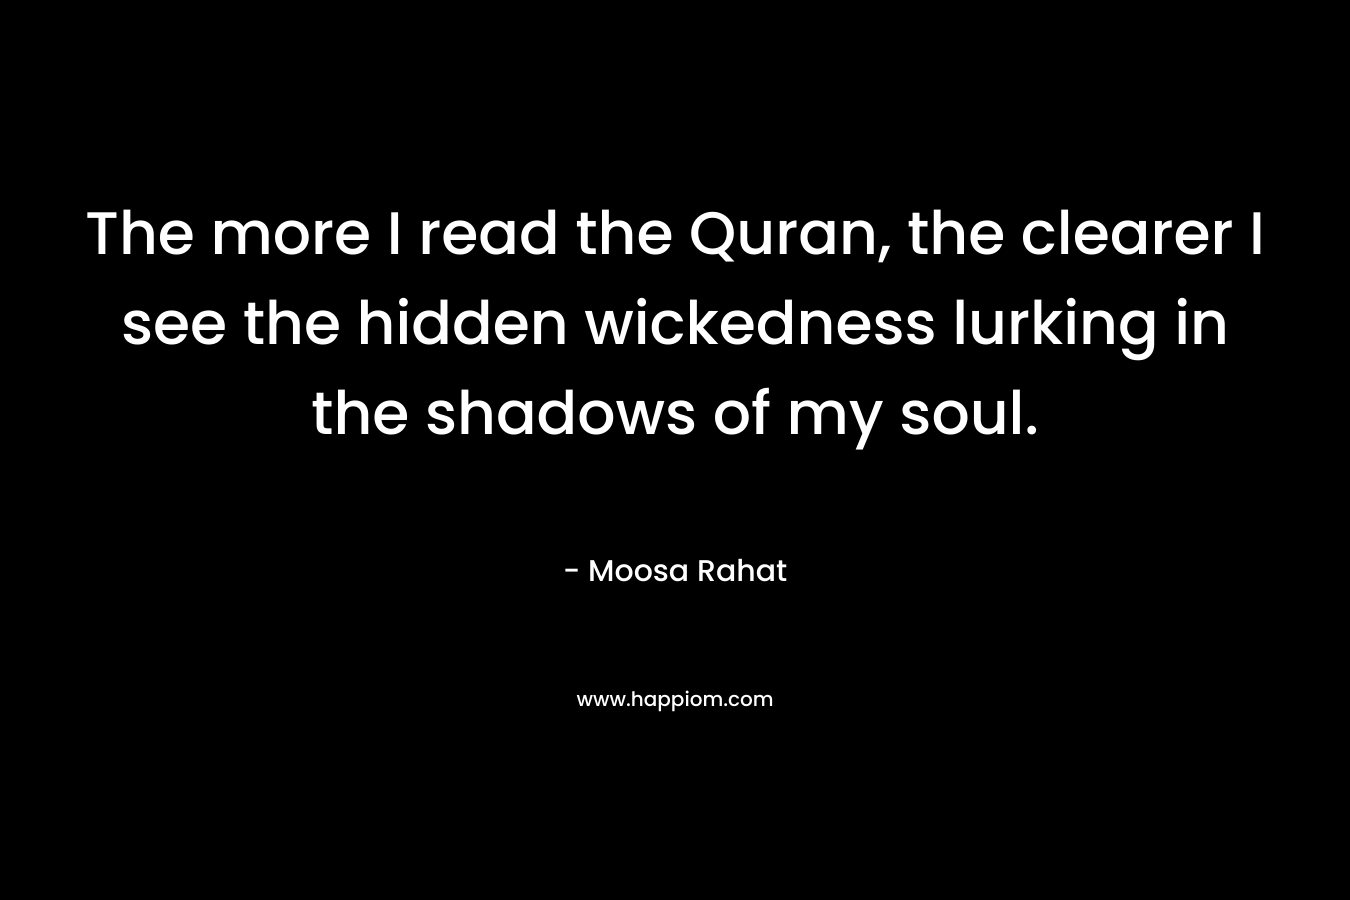 The more I read the Quran, the clearer I see the hidden wickedness lurking in the shadows of my soul. – Moosa Rahat